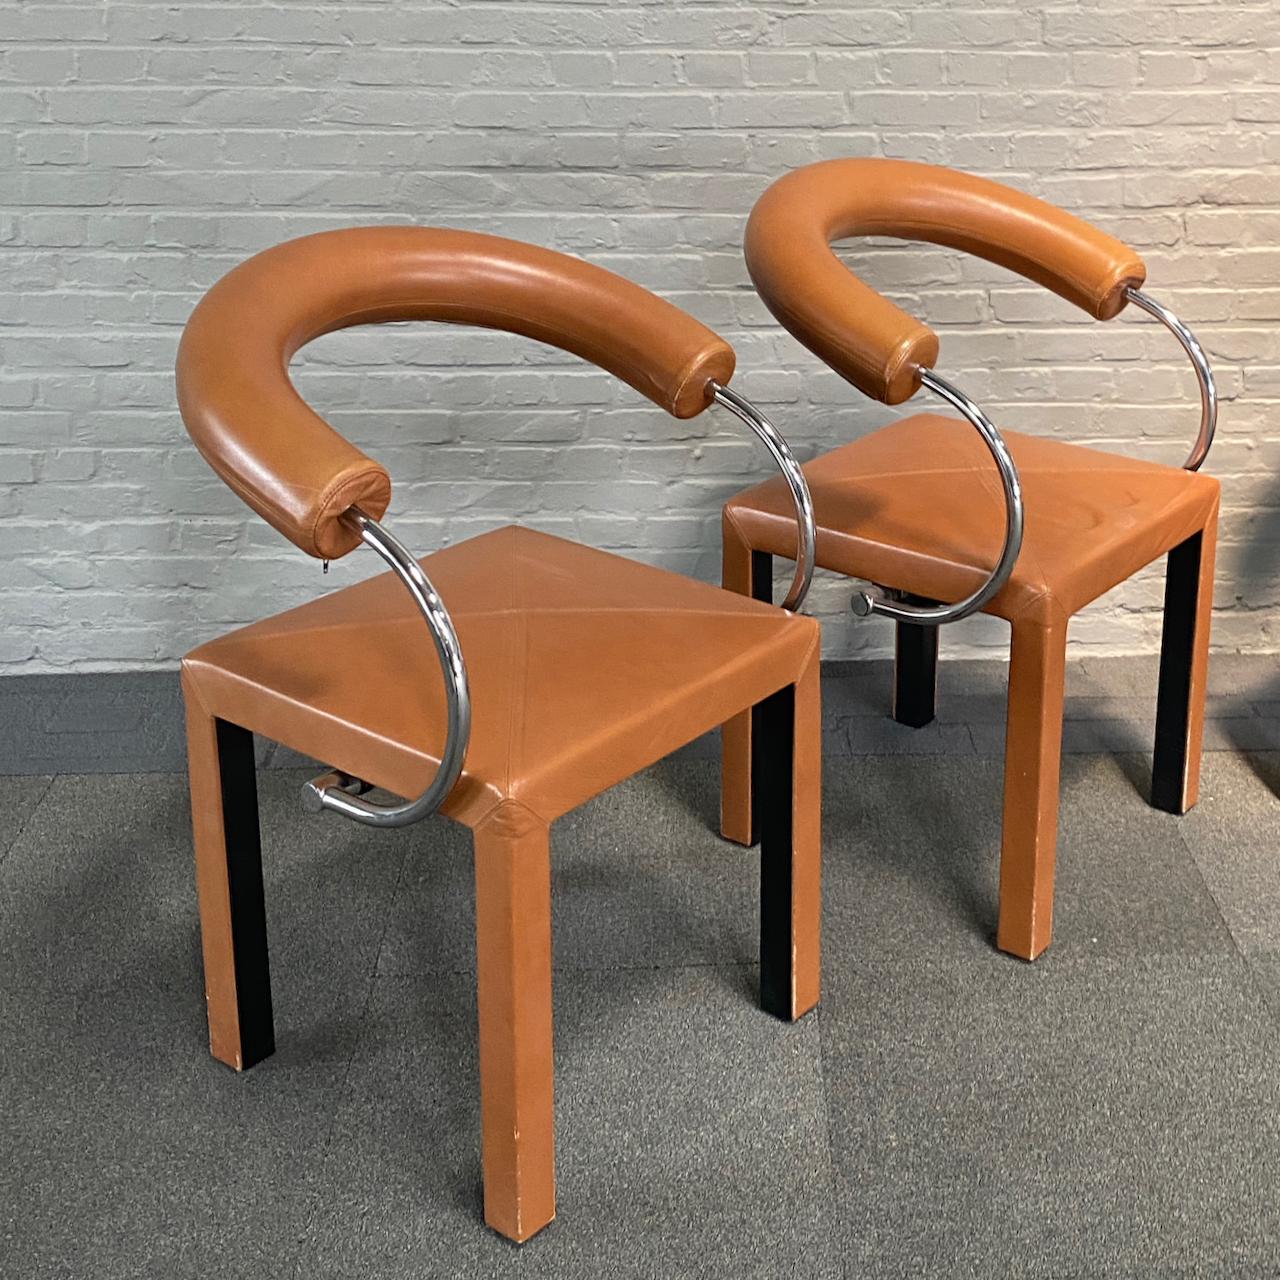 Famous Italian architect Paolo Piva designed these amazing architectural chairs.
It is a set of 4 dining chairs. The name of the chairs is Arcosa.
They were produced by B&B Italia. One of the leading Italian design furniture manufacturer.
The design